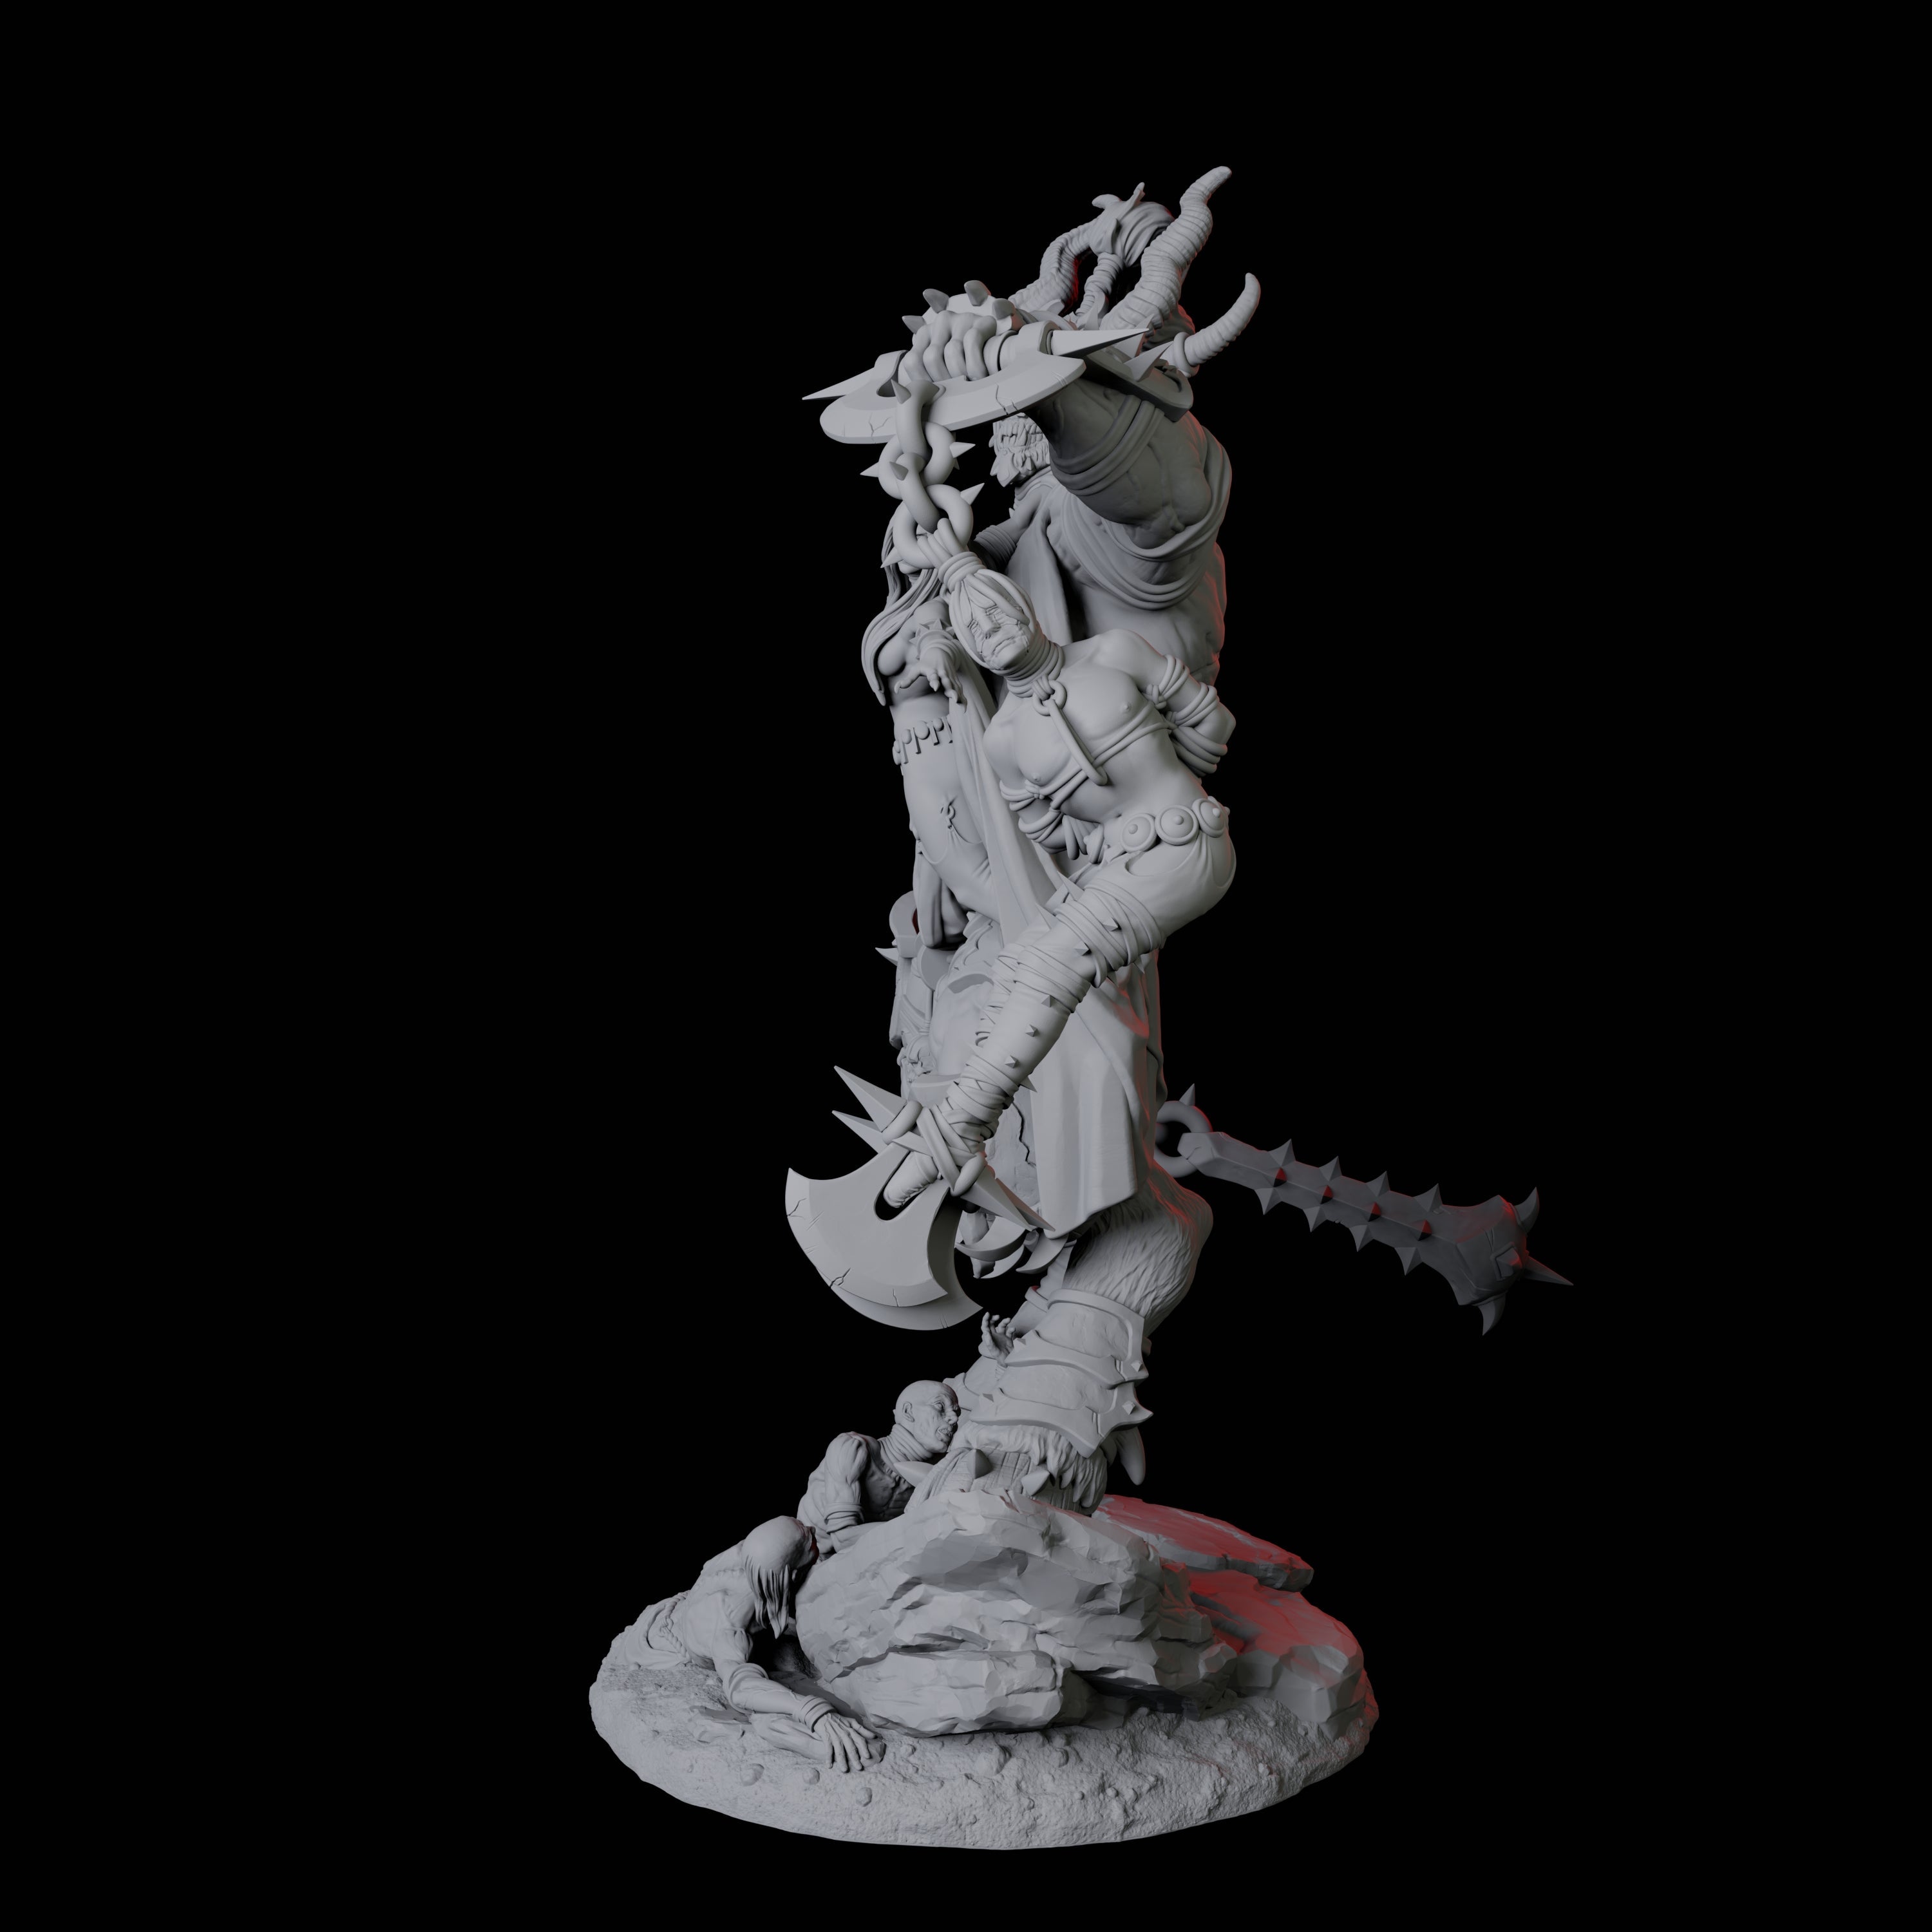 Seduced Bearded Devil Champion C Miniature for Dungeons and Dragons, Pathfinder or other TTRPGs